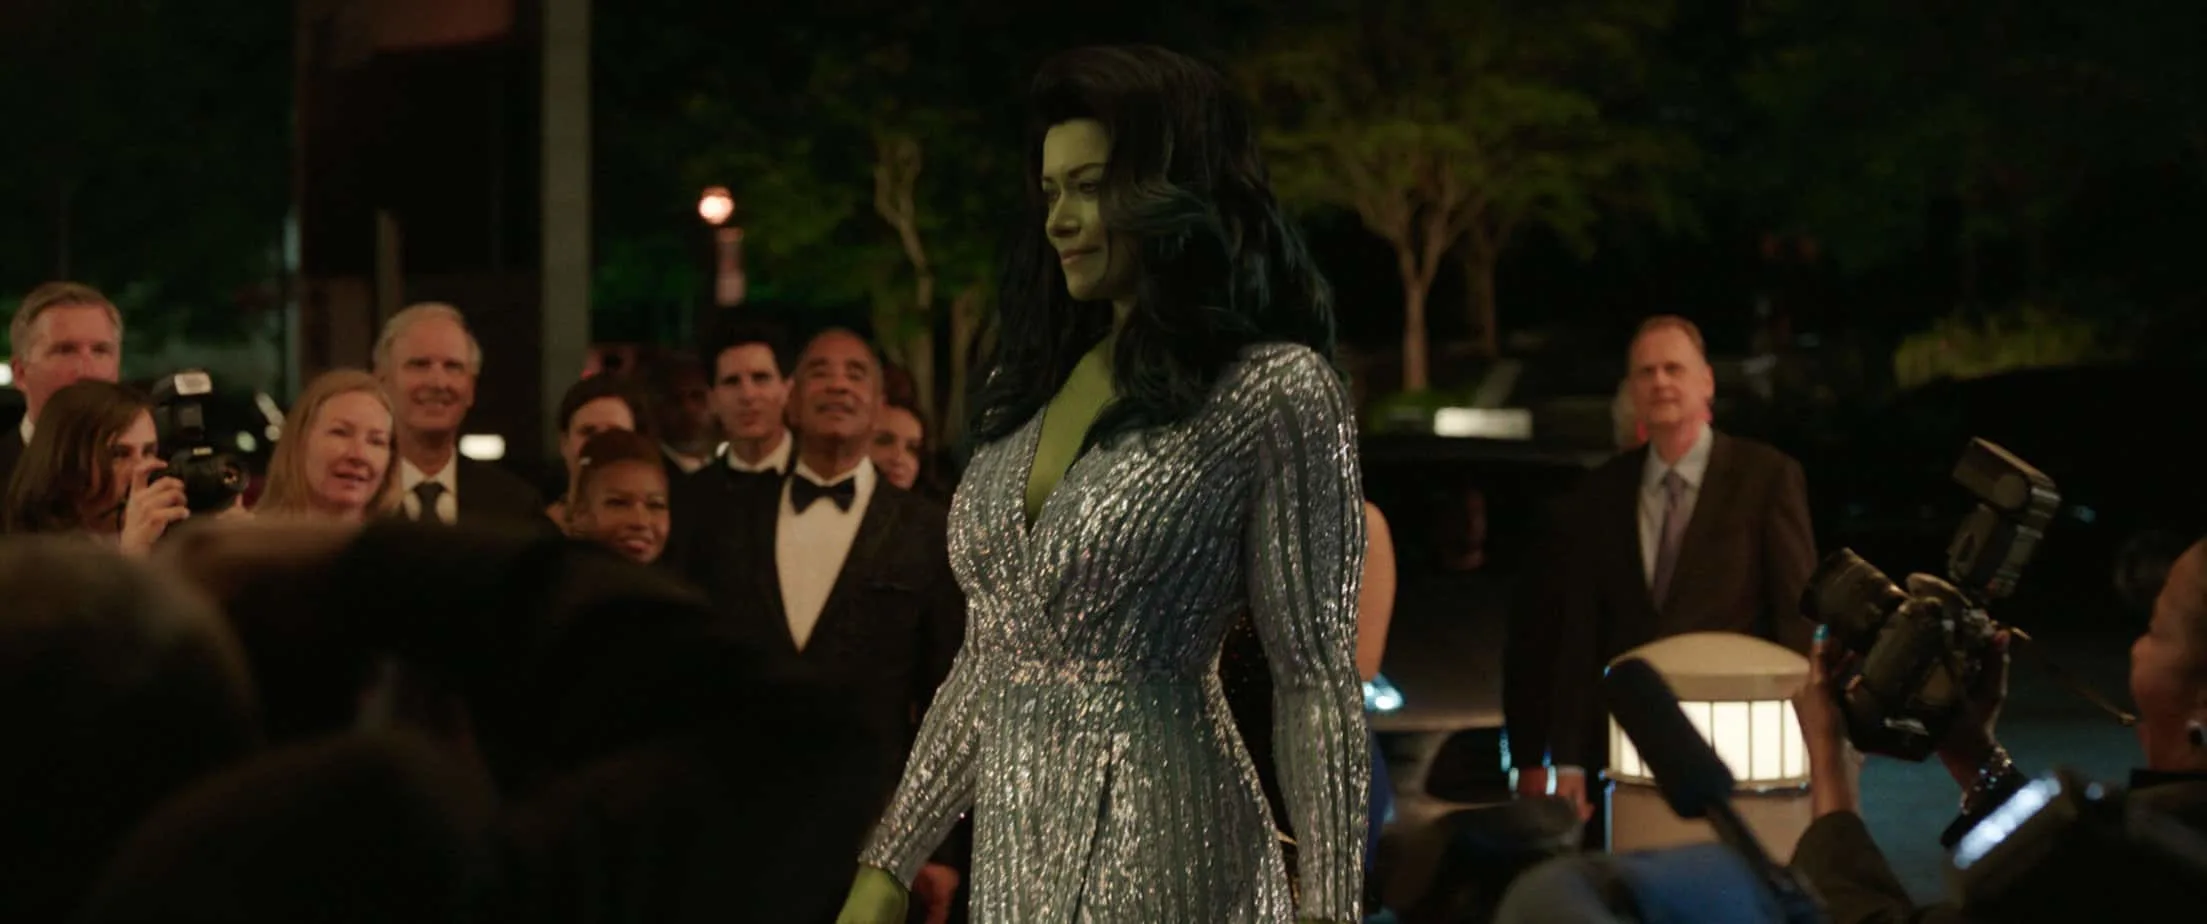 SheHulk (Big green woman) is walking through a a crowd, with everyone staring at her. She is wearing a fancy silver dress. 